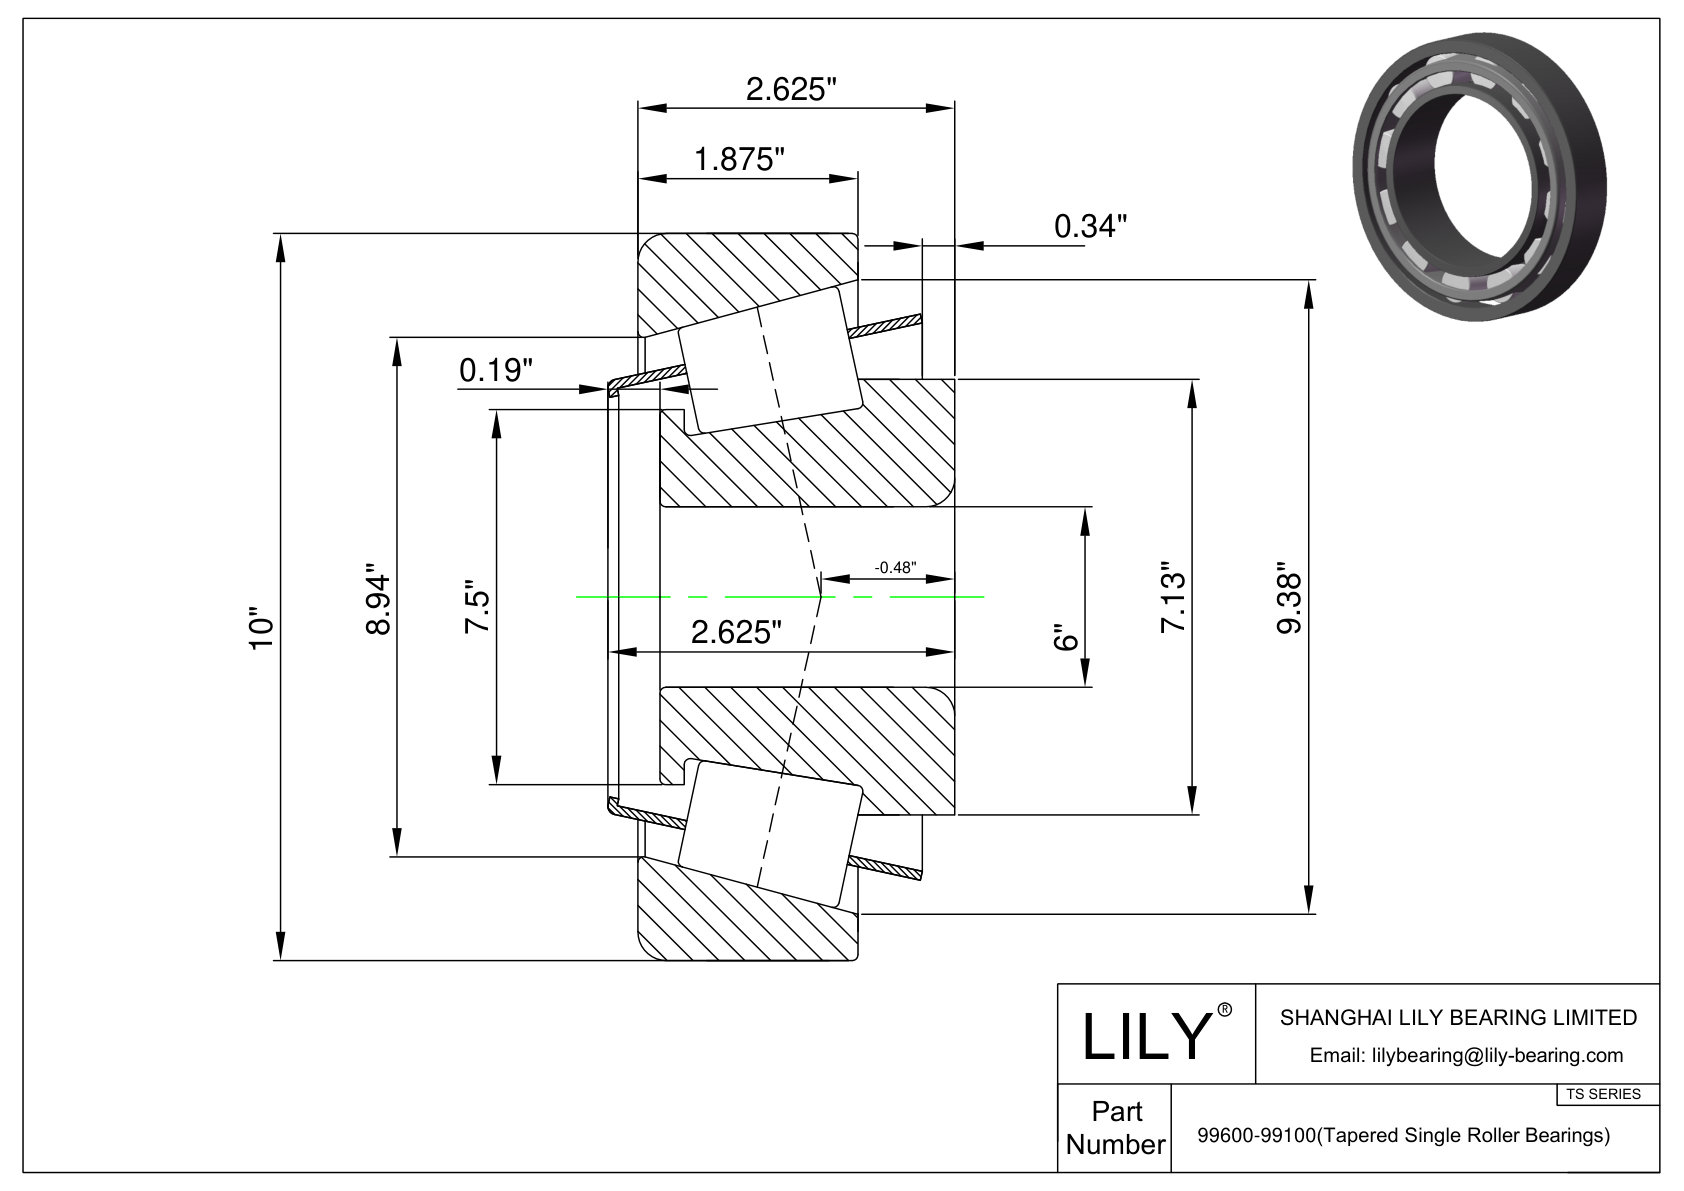 99600-99100 TS (Tapered Single Roller Bearings) (Imperial) cad drawing